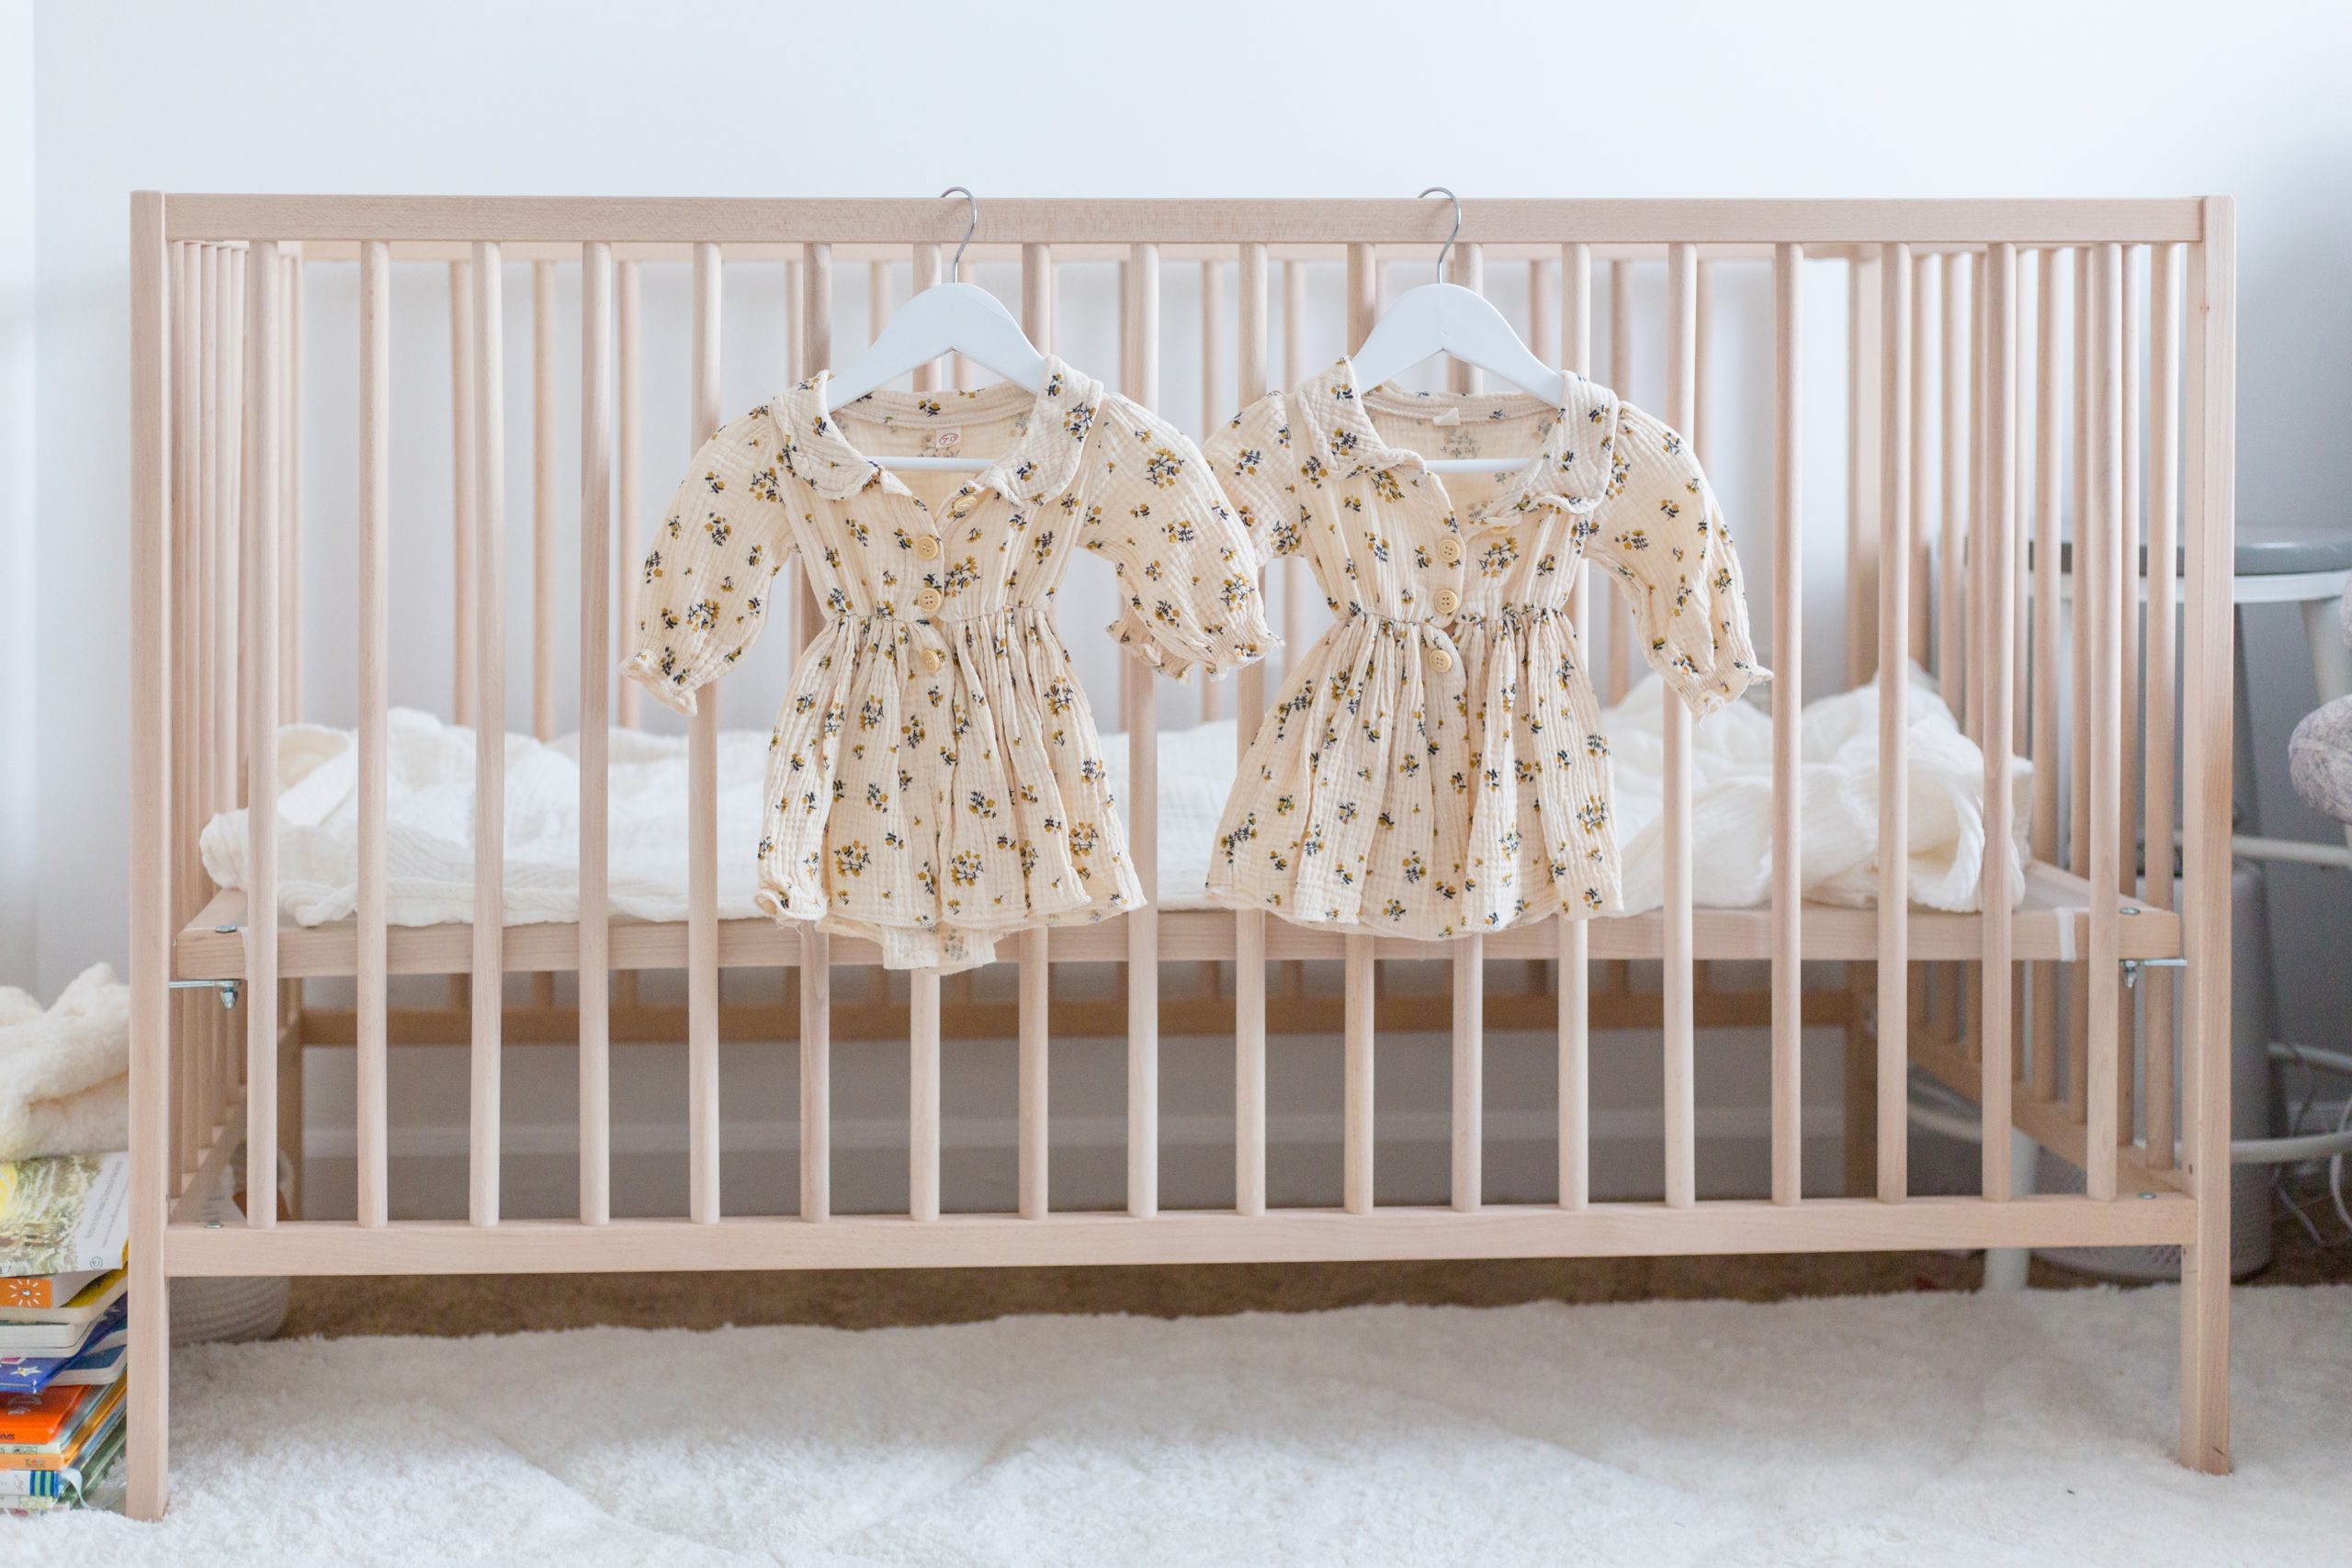 Detail photos are so important! This sweet family was expecting twins so we hung 2 matching outfits on the babies' crib. How adorable is this? Click to see more from this sweet session live on the blog now. 